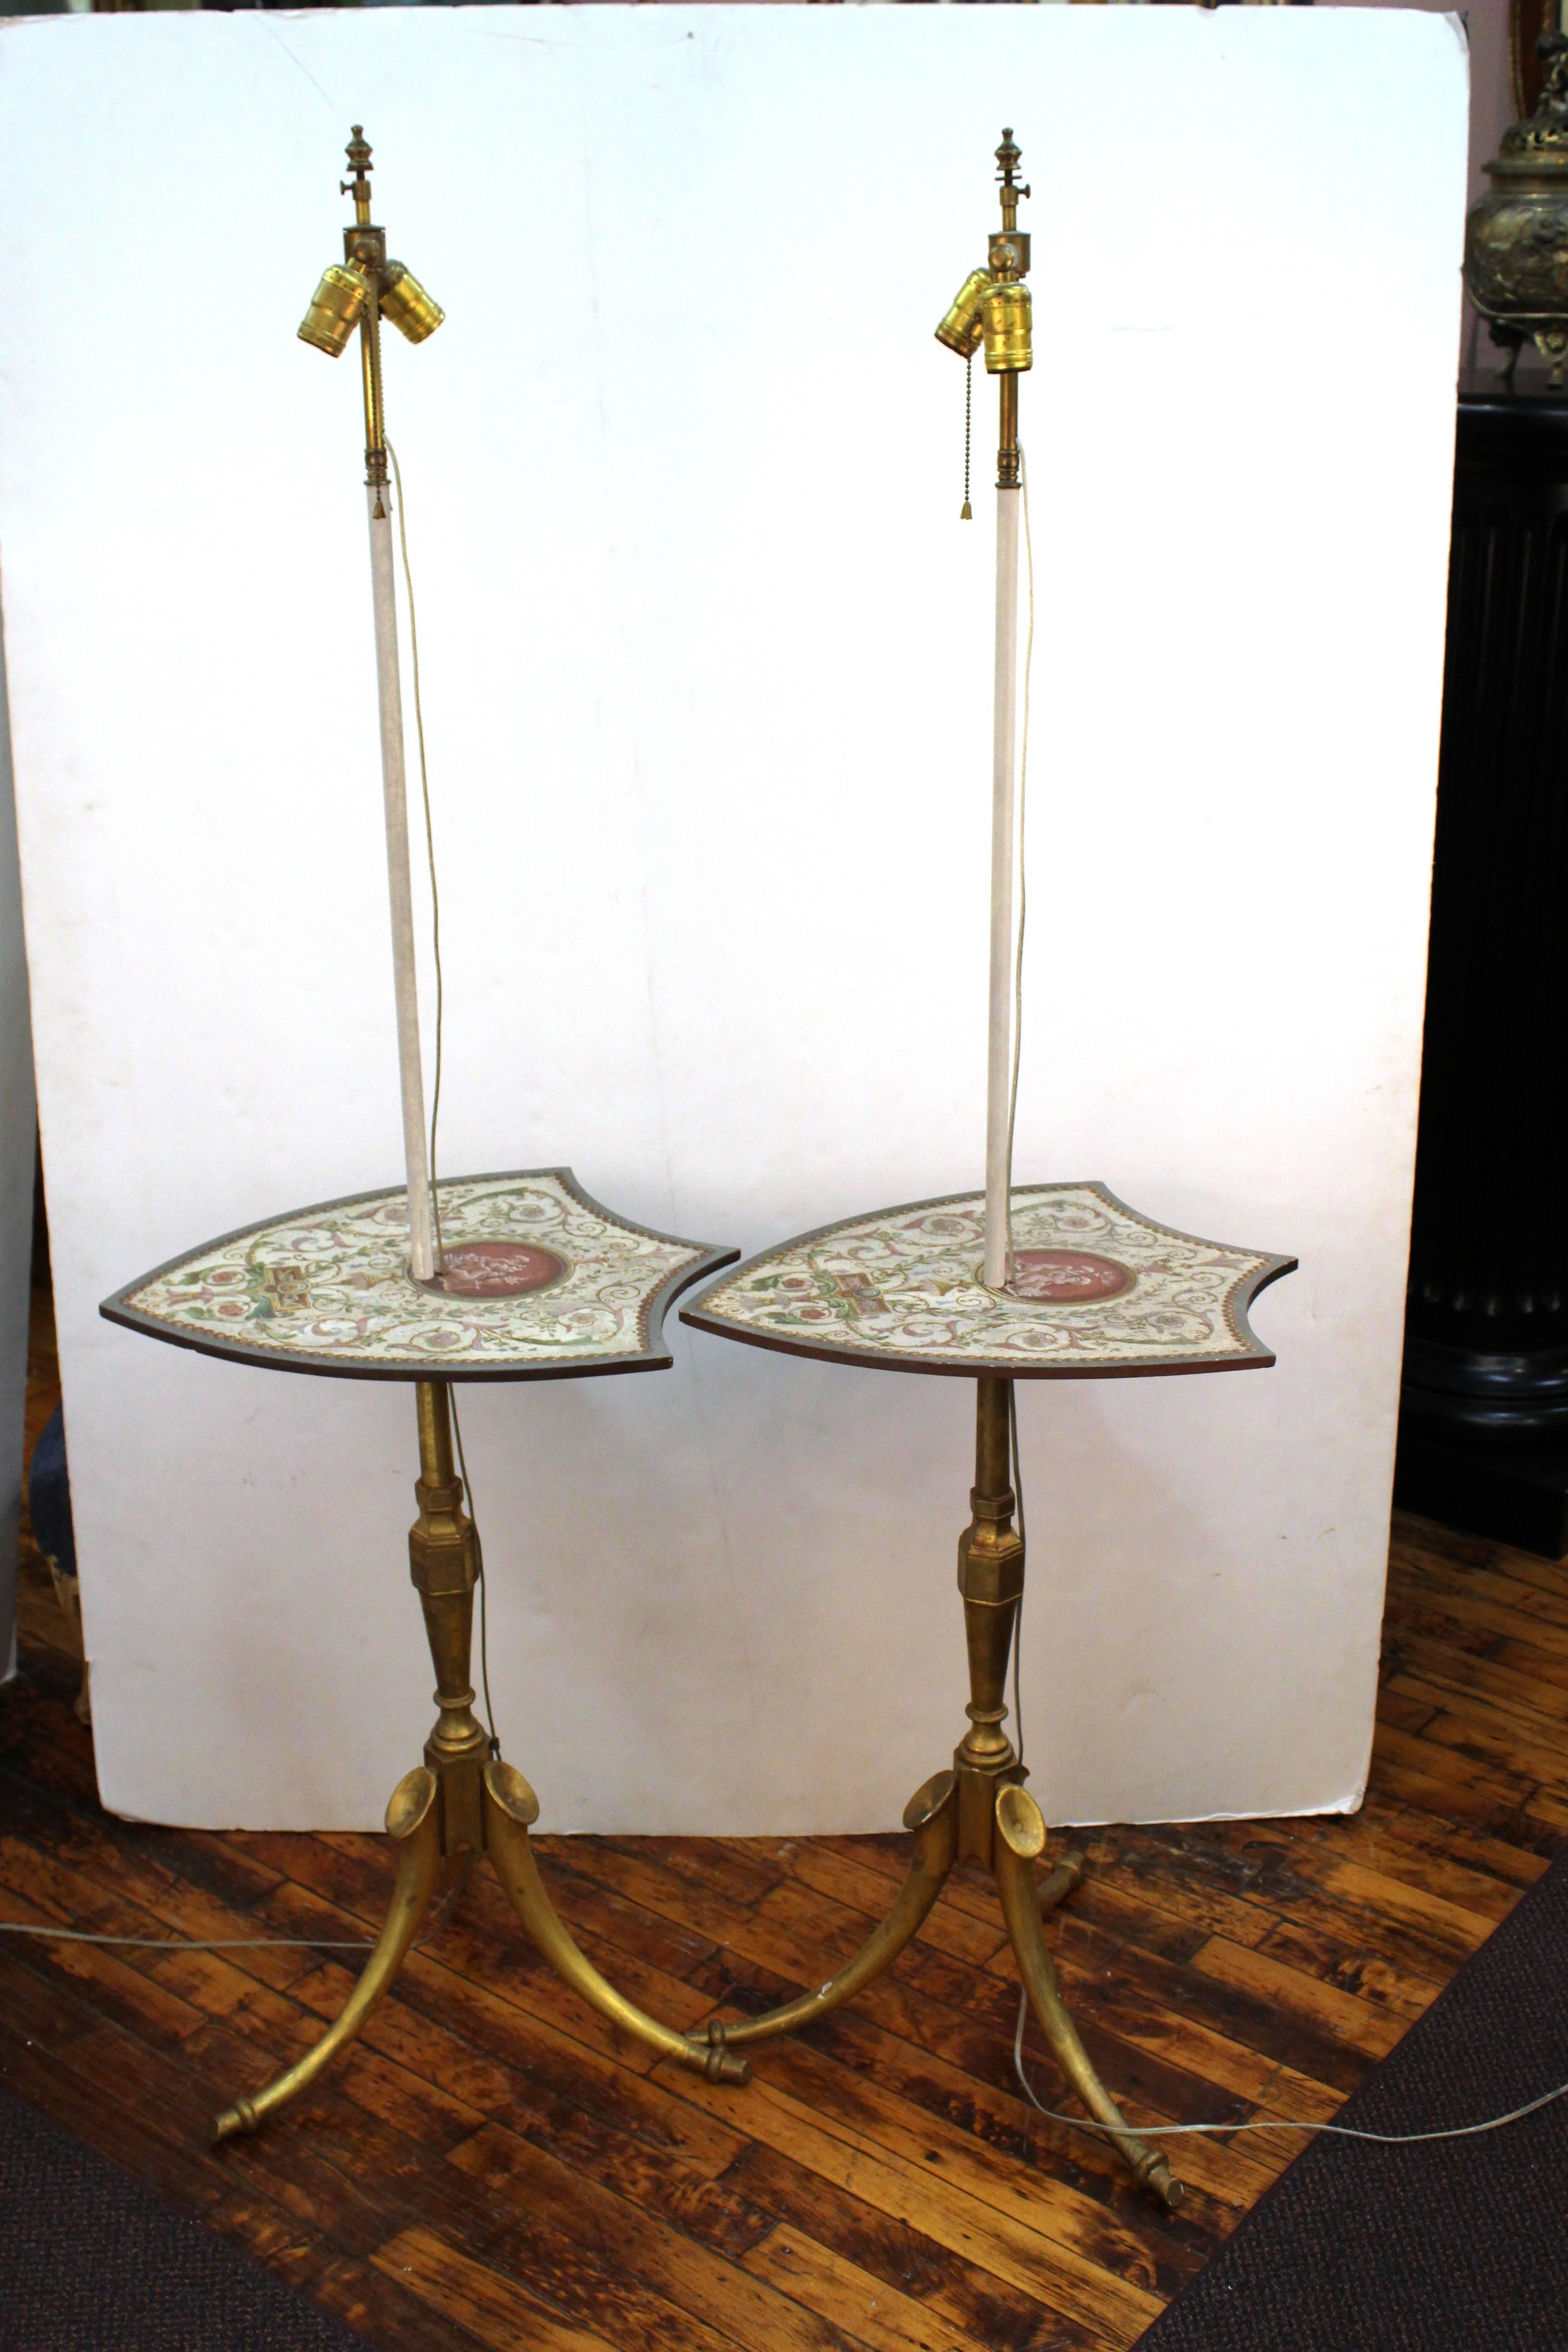 20th Century Pair of Painted Shield Floor Lamps